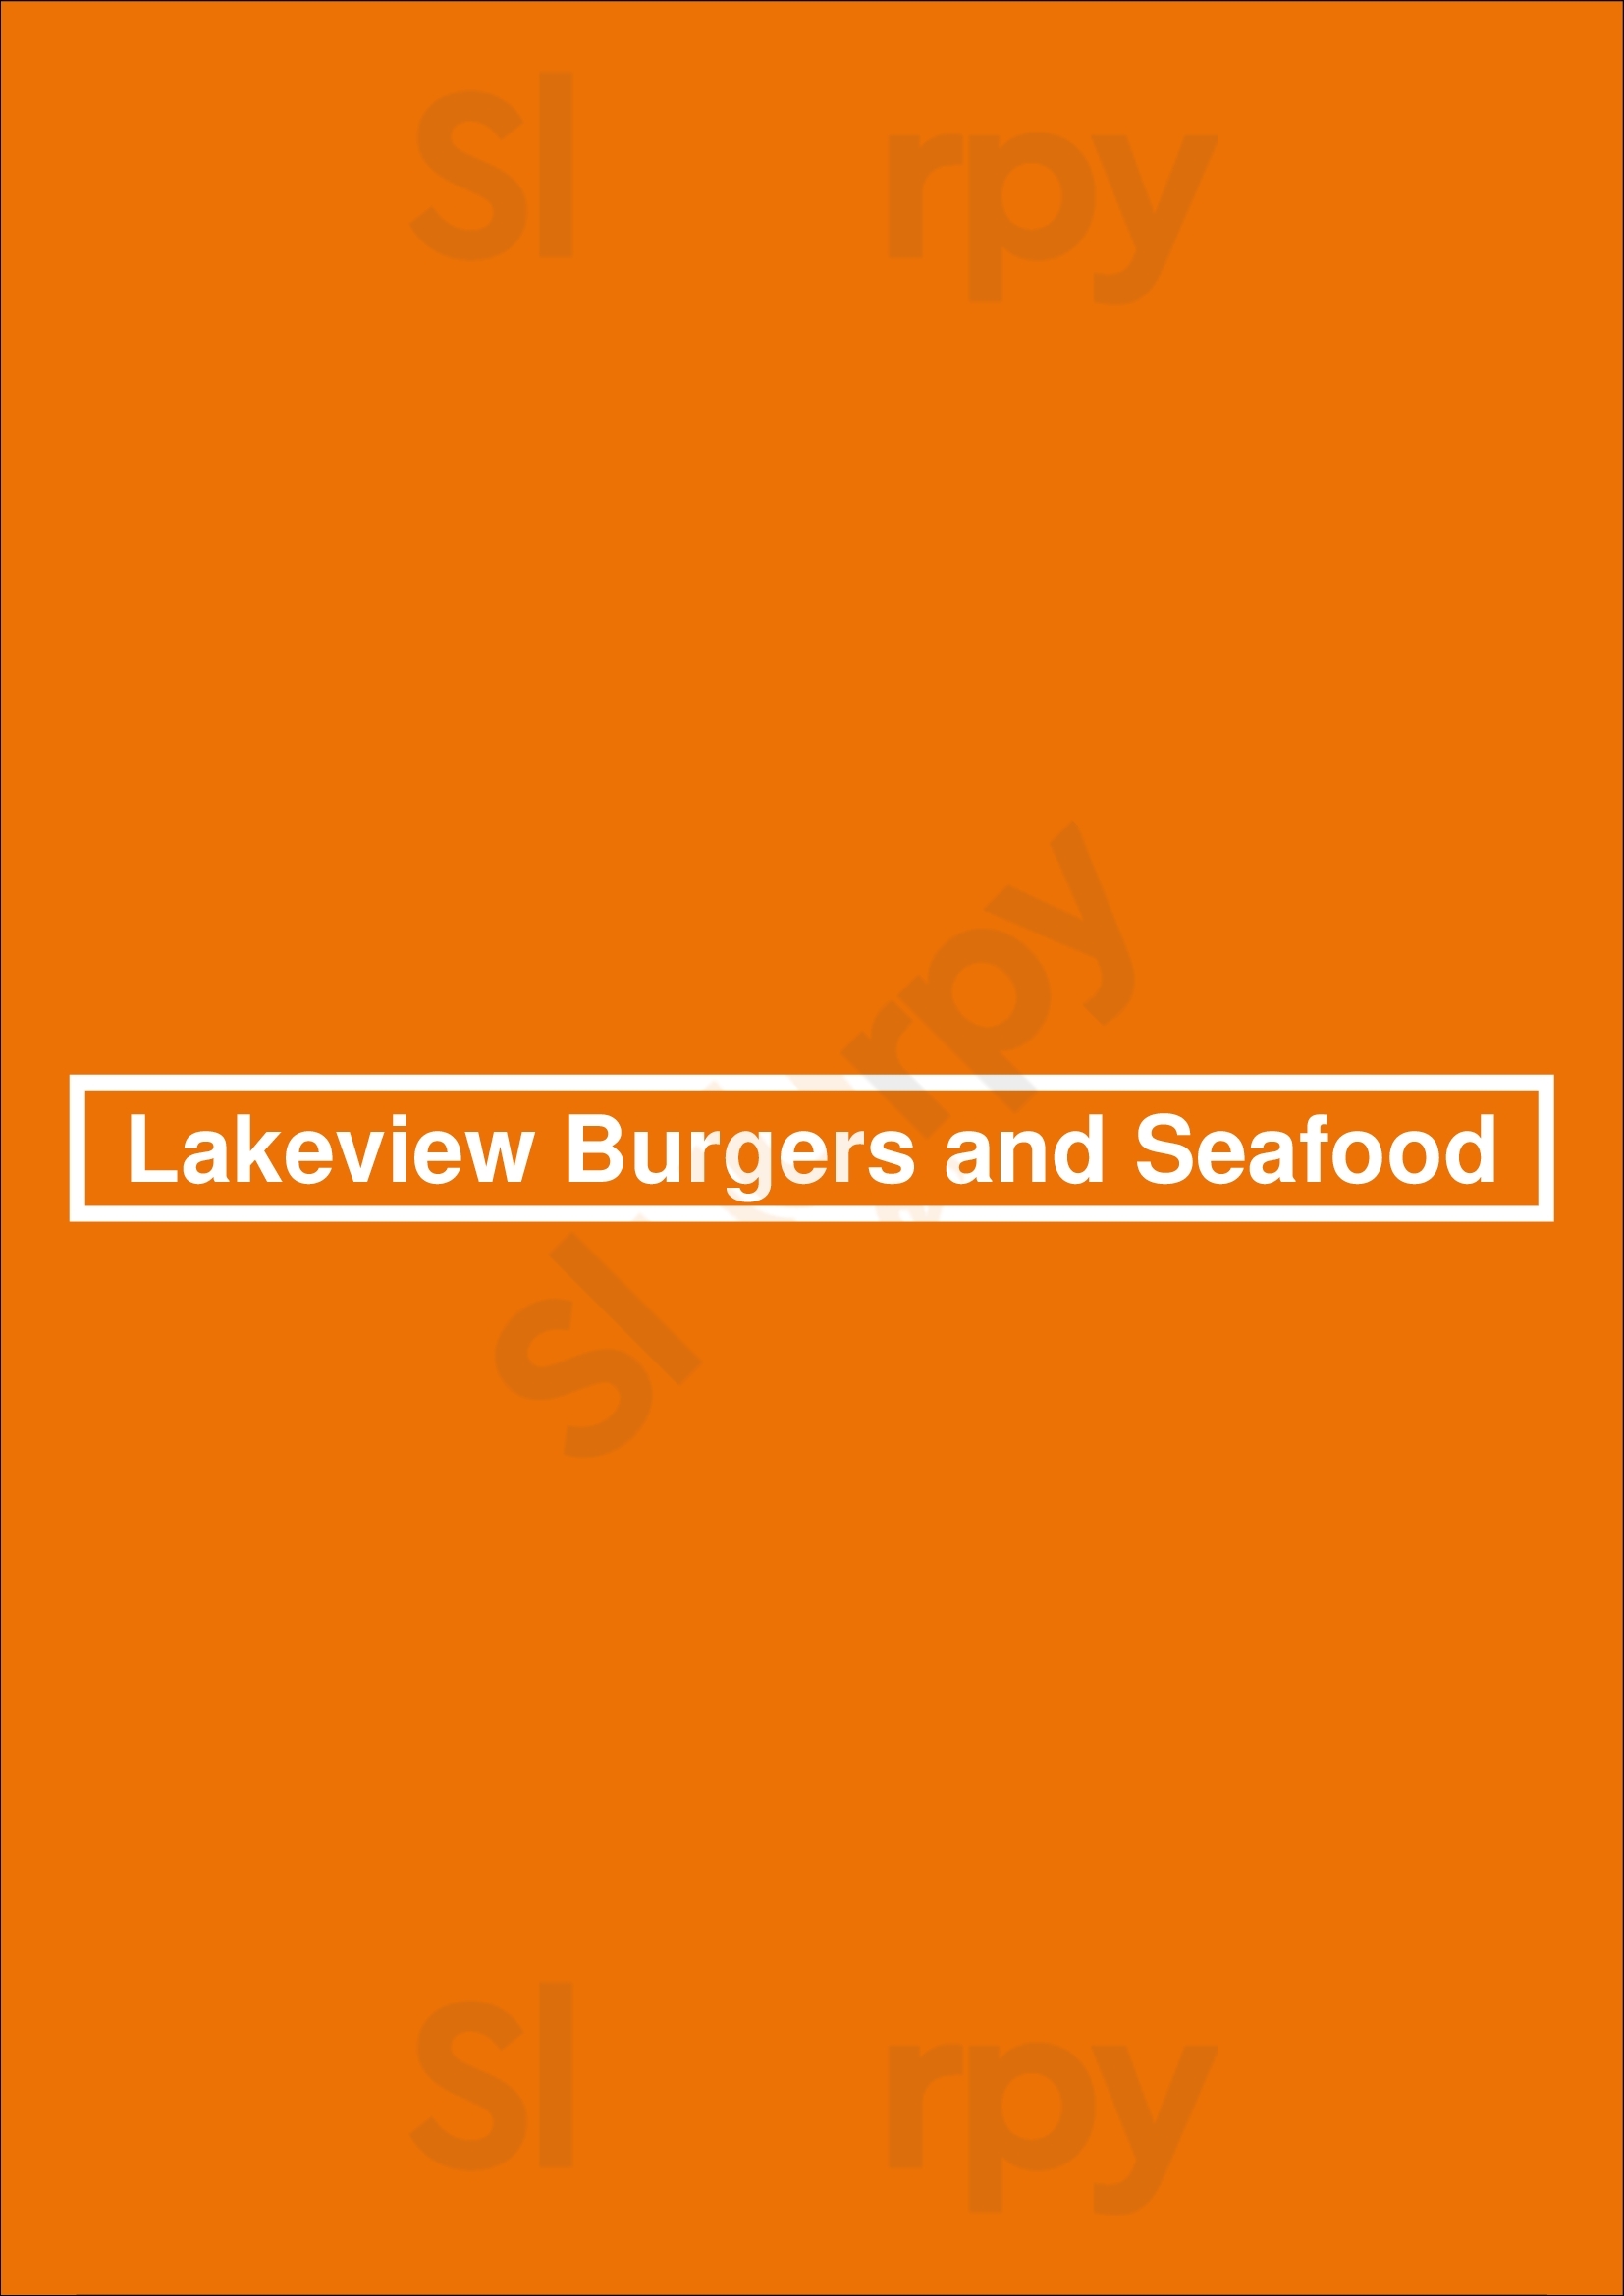 Lakeview Burgers And Seafood New Orleans Menu - 1